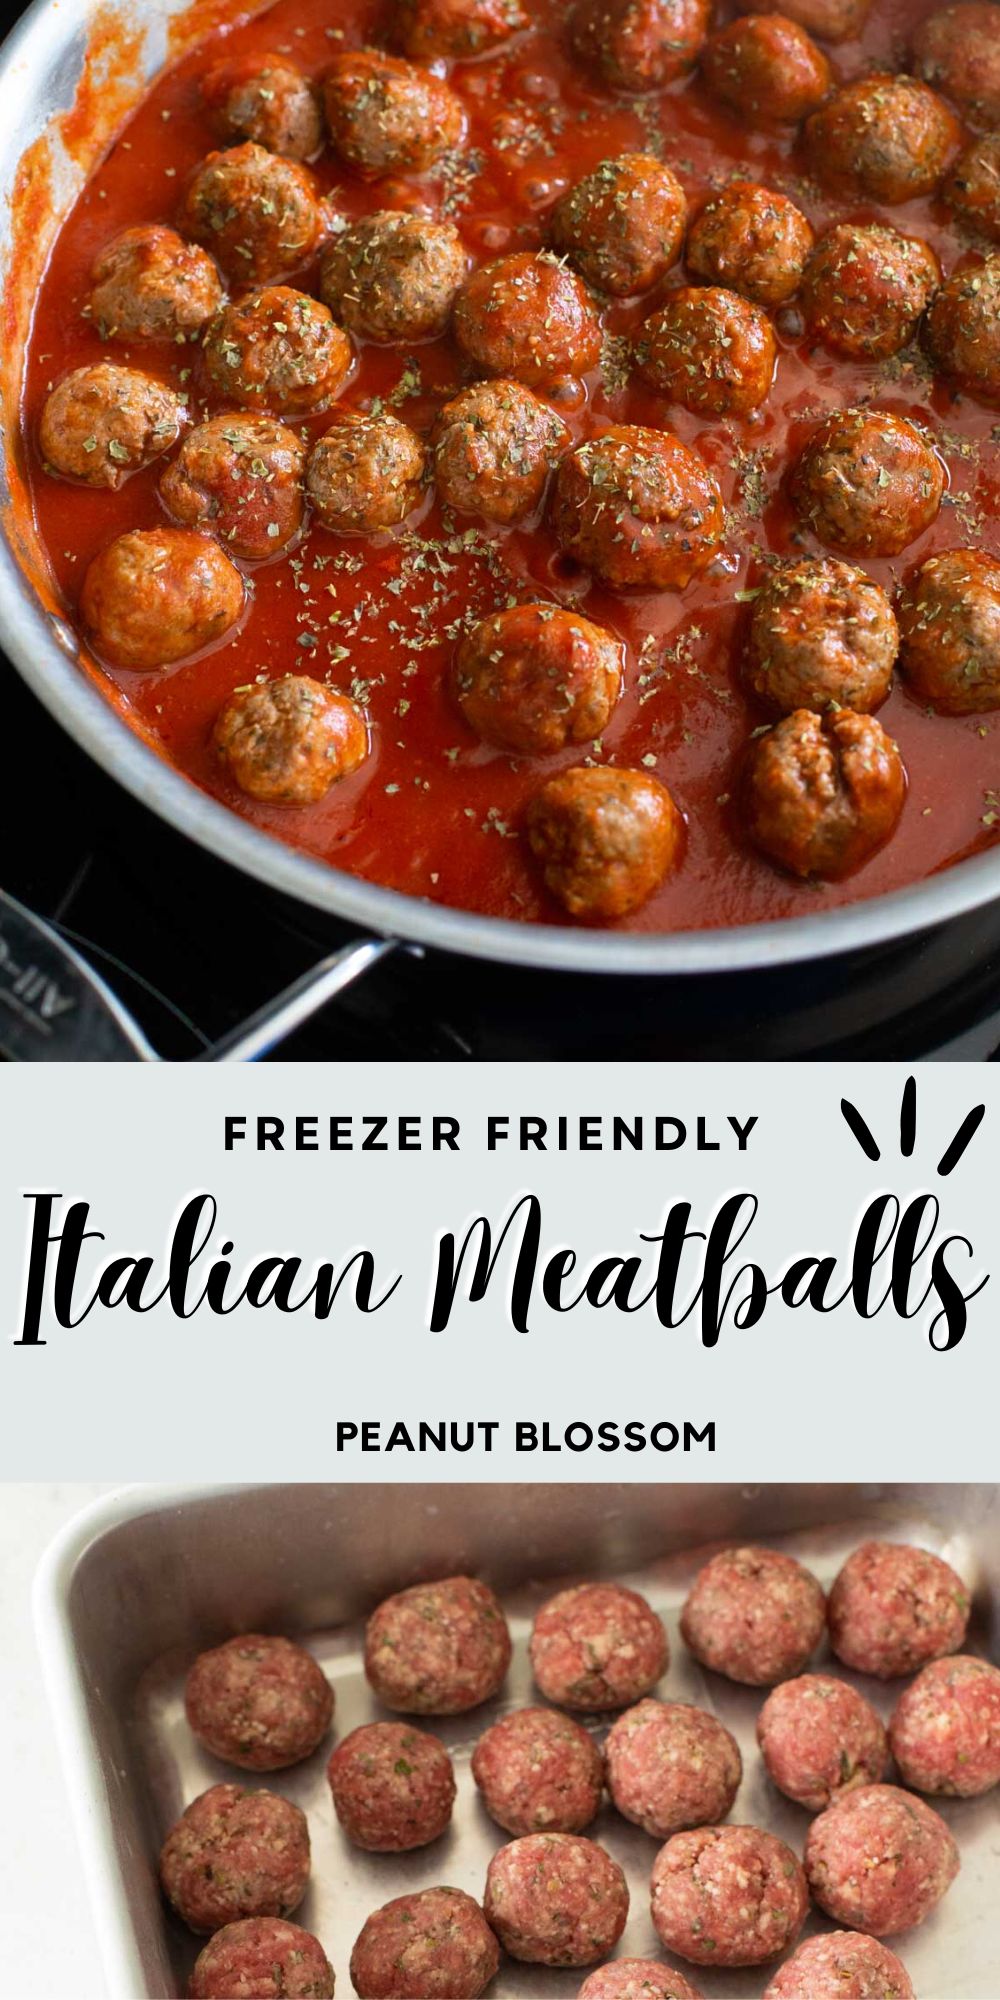 The photo collage shows the Italian meatballs in tomato sauce next to a photo of them lined up to be frozen.